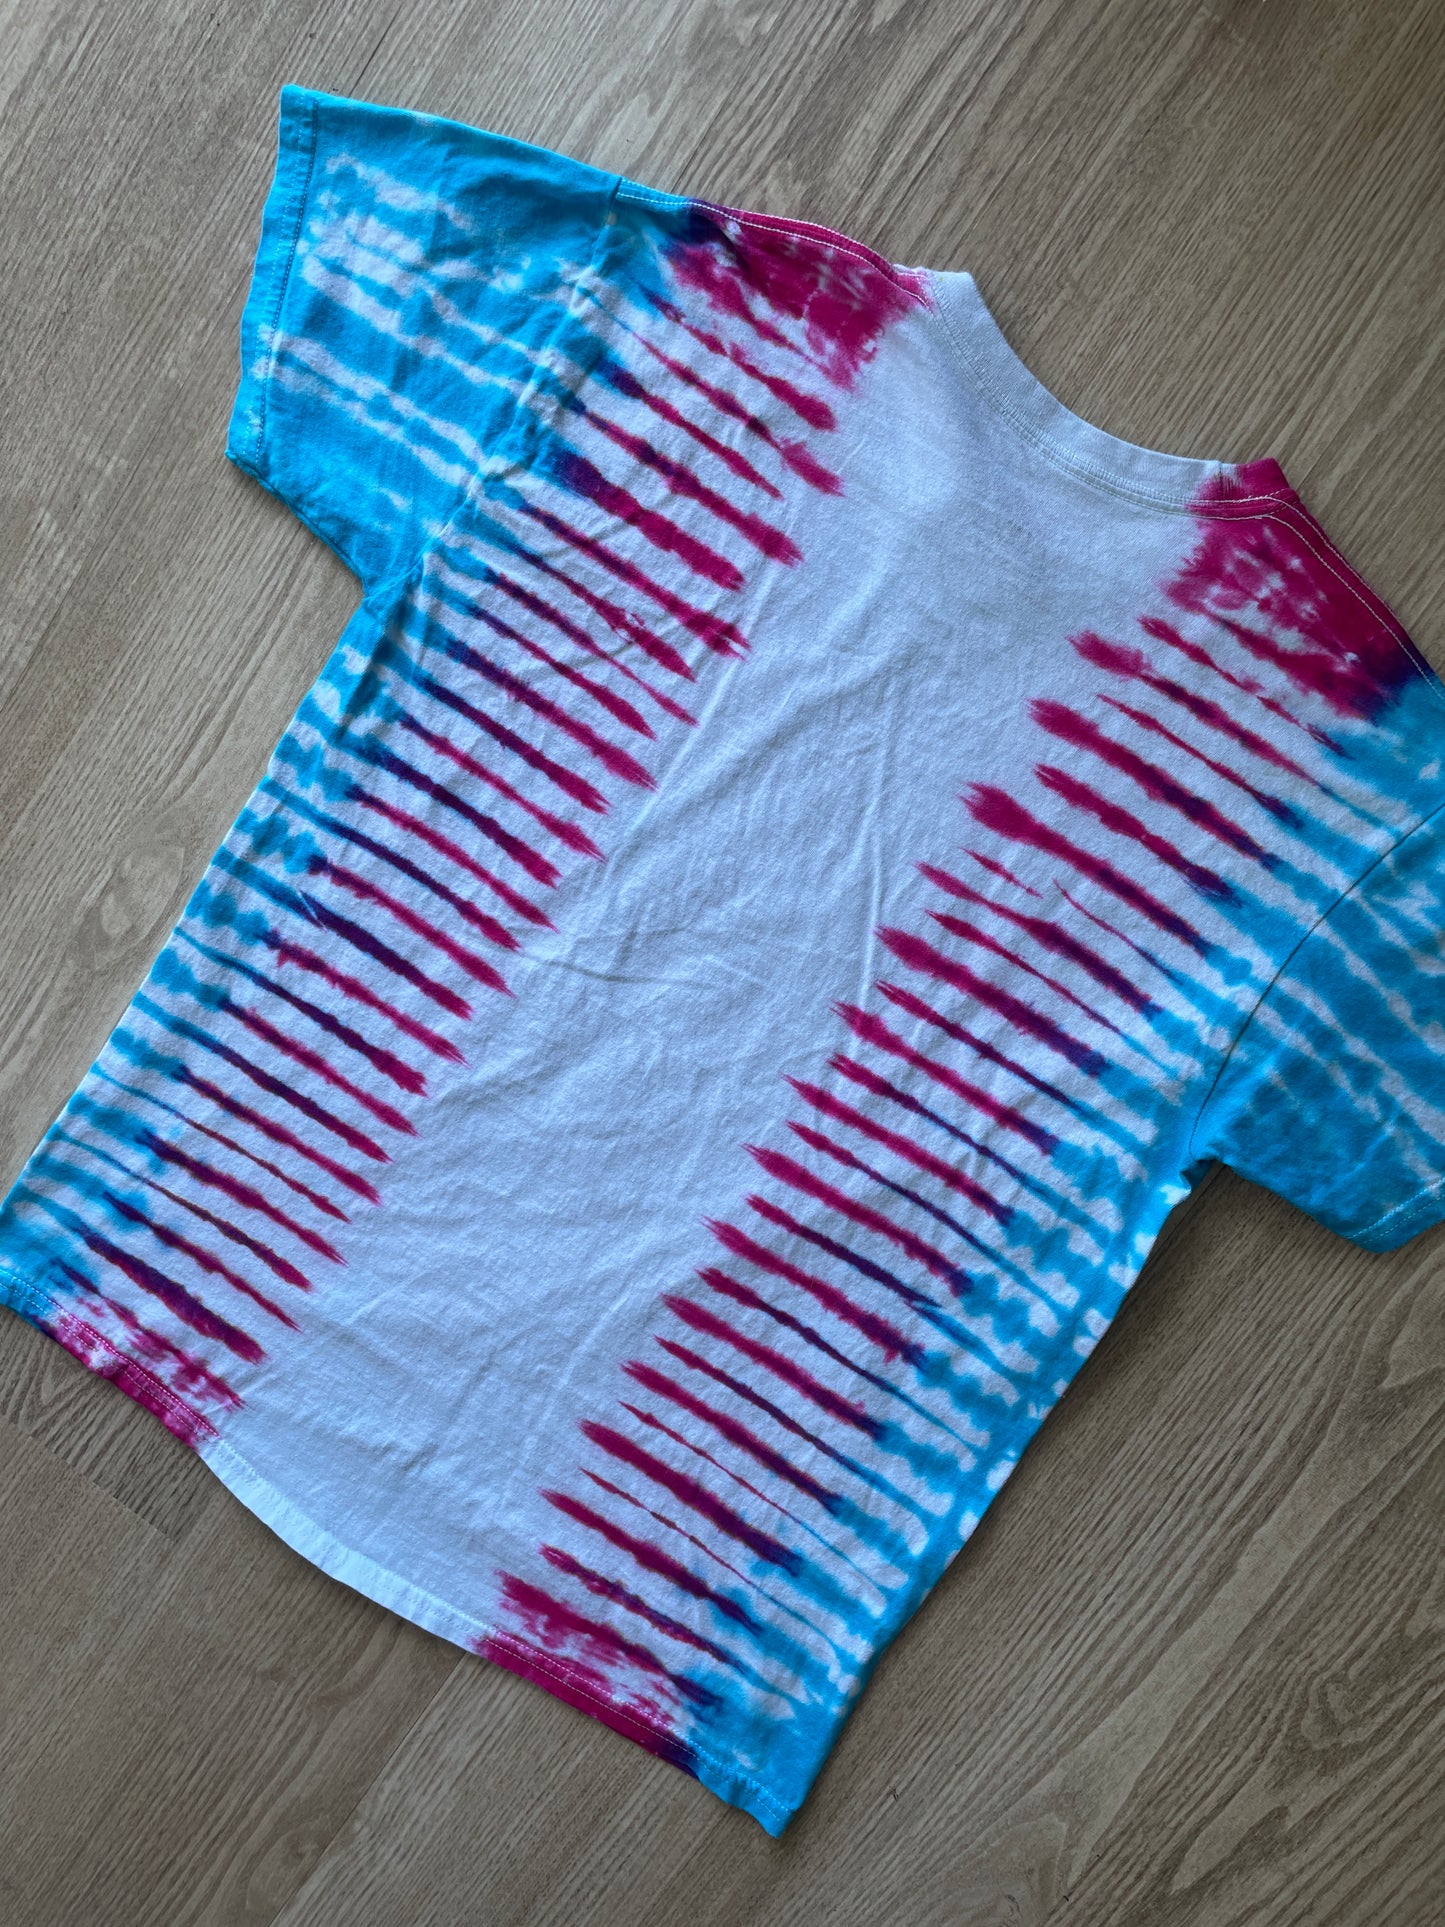 MEDIUM Men’s Trans Pride Flag-Inspired Handmade Tie Dye T-Shirt | One-Of-a-Kind Pink, Blue, and White Short Sleeve